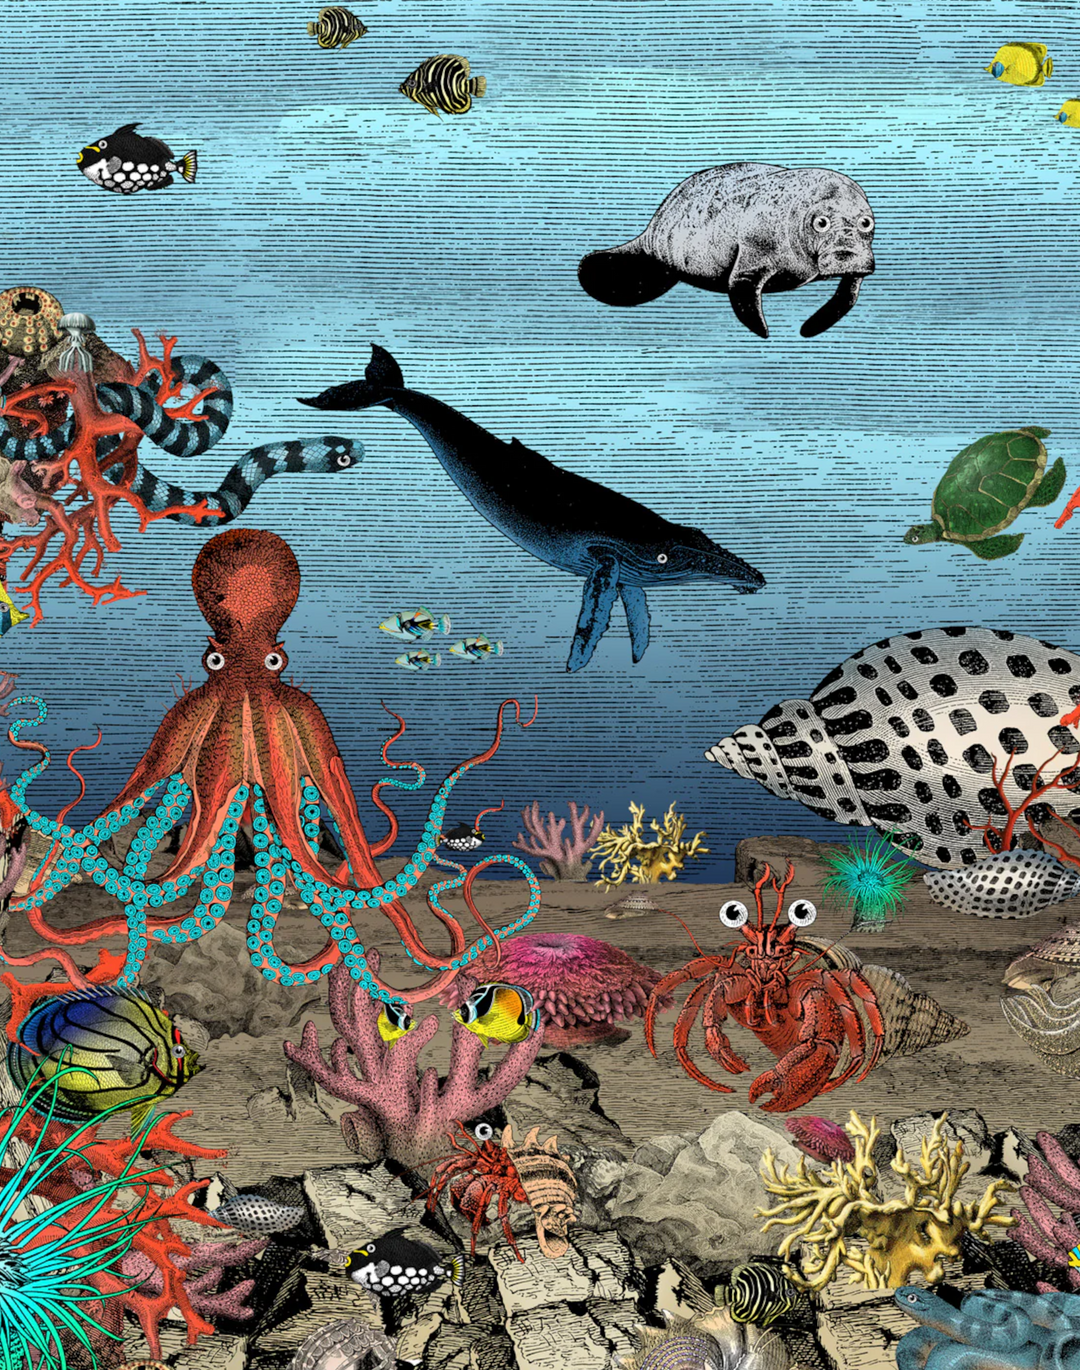 The Great Barrier Reef Wall Mural